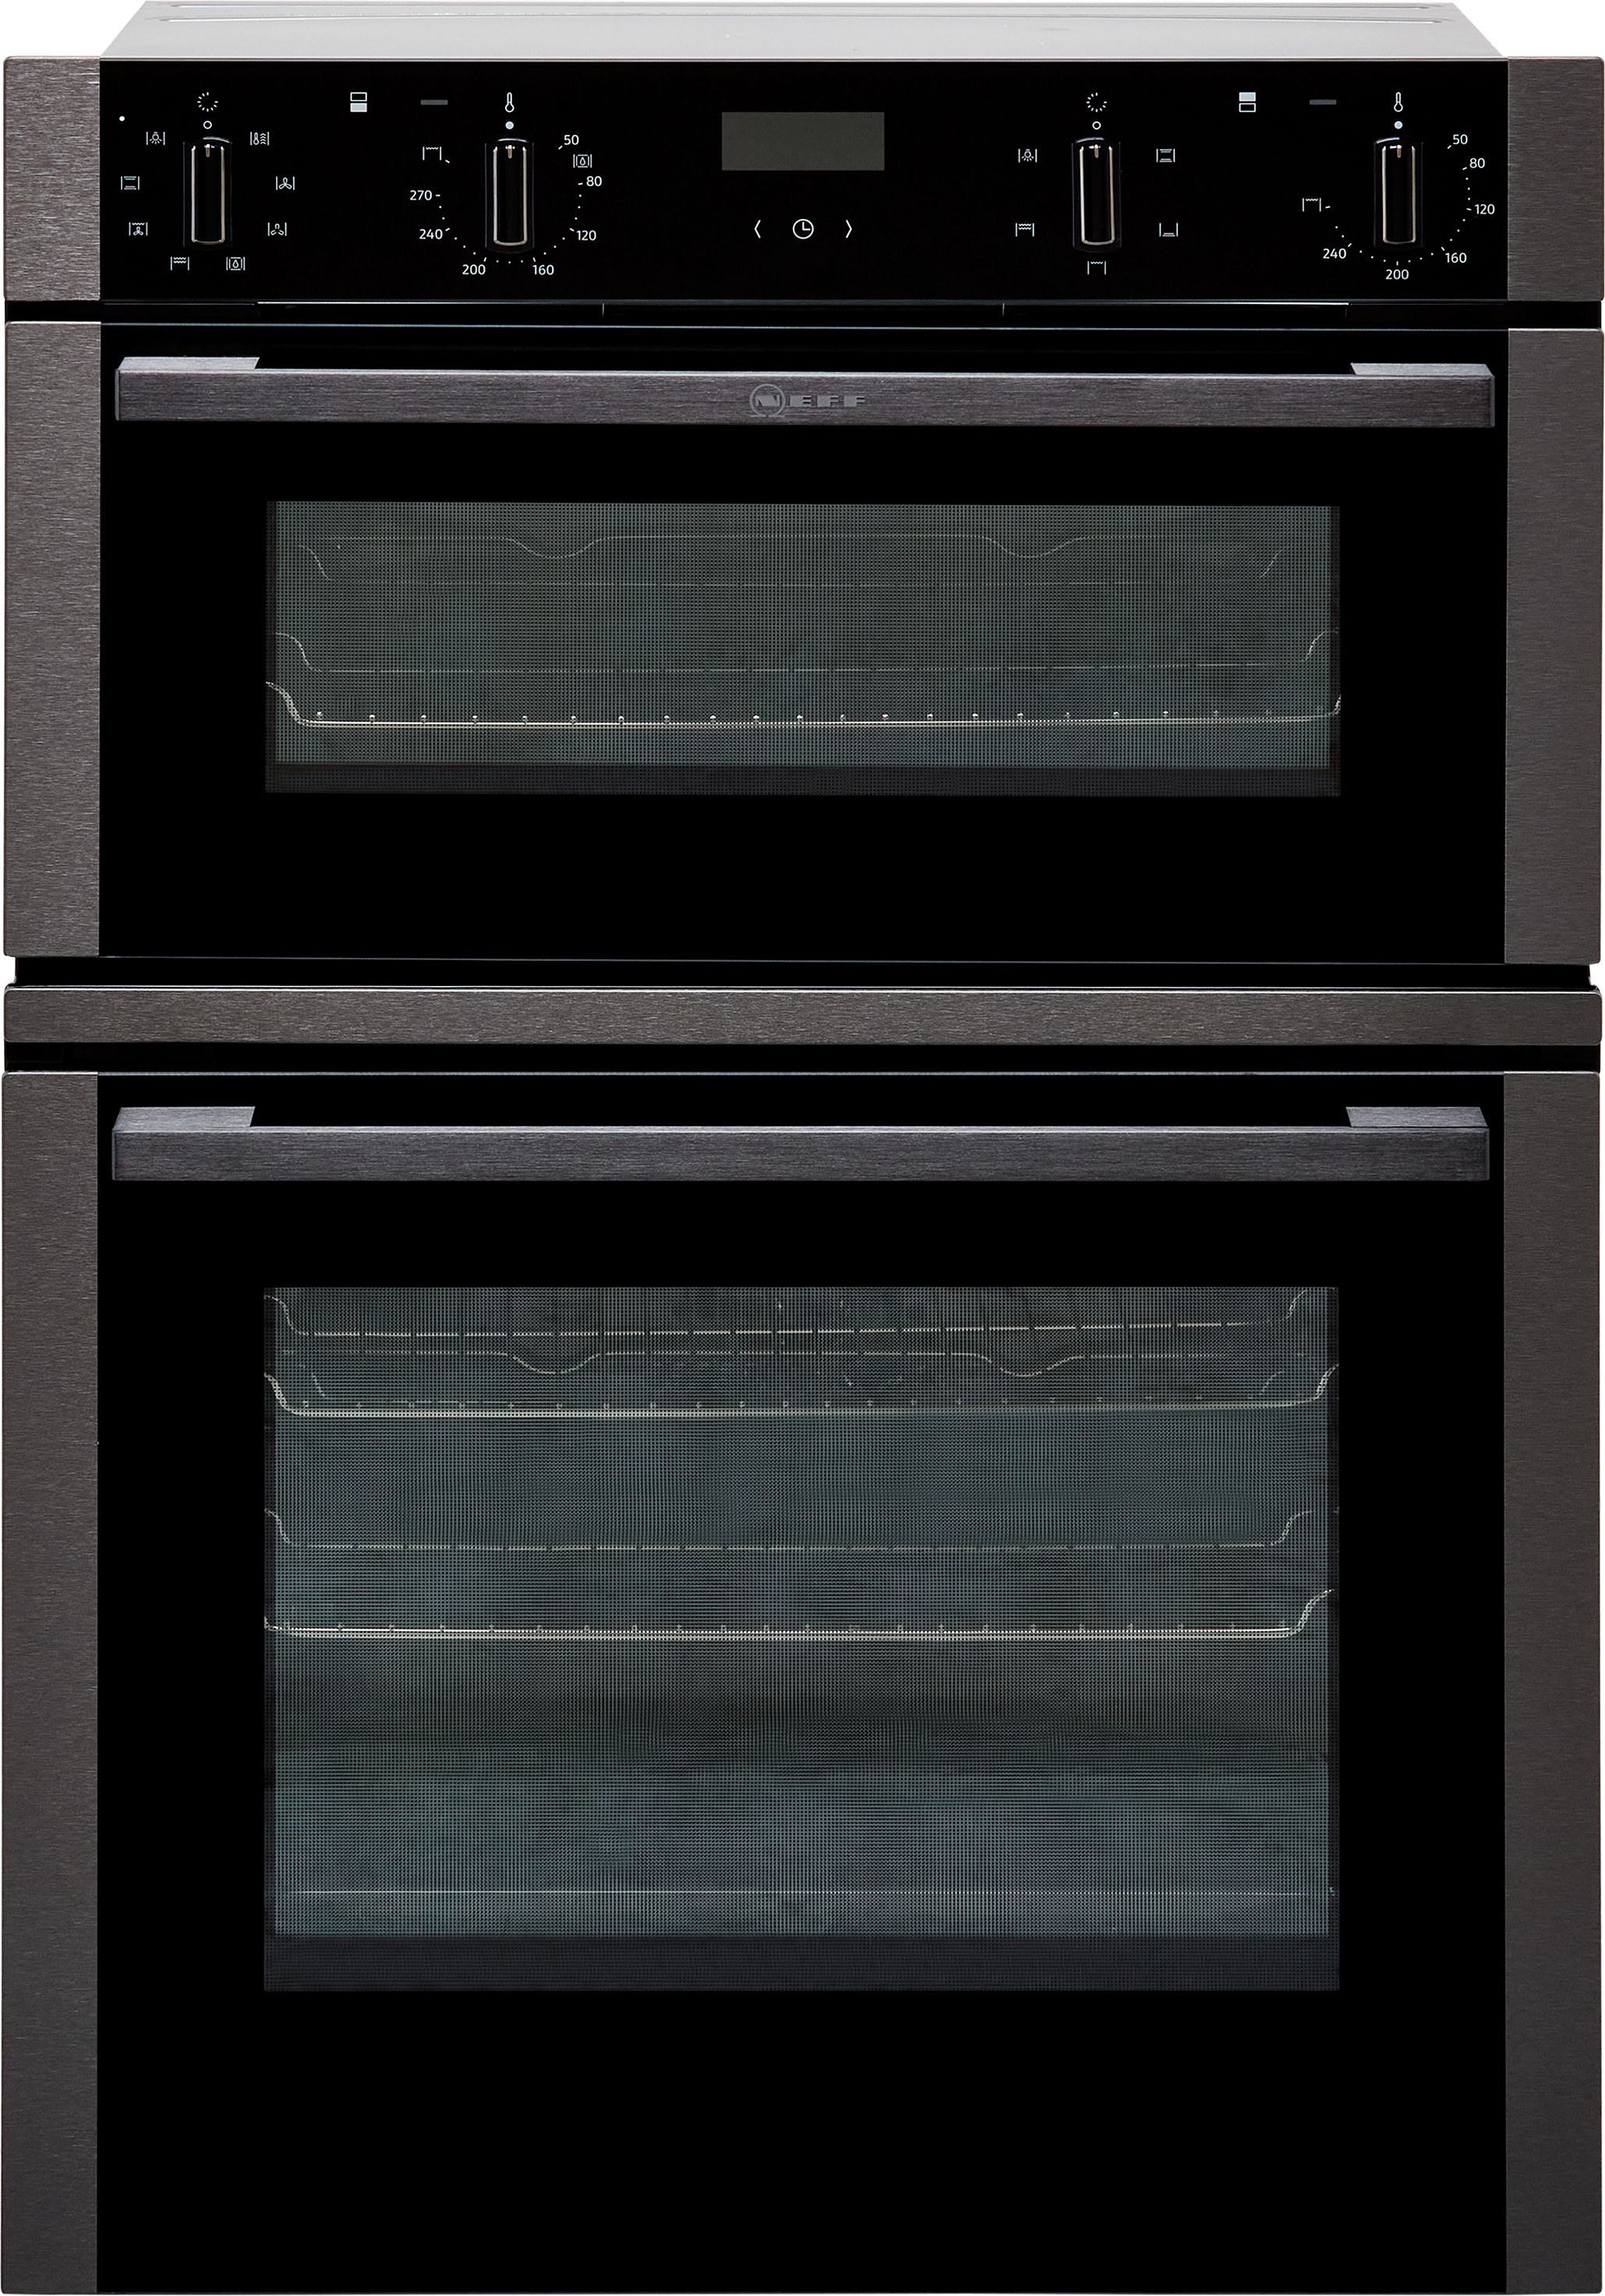 NEFF N50 U1ACE2HG0B Built In Electric Double Oven - Graphite - A/B Rated, Silver